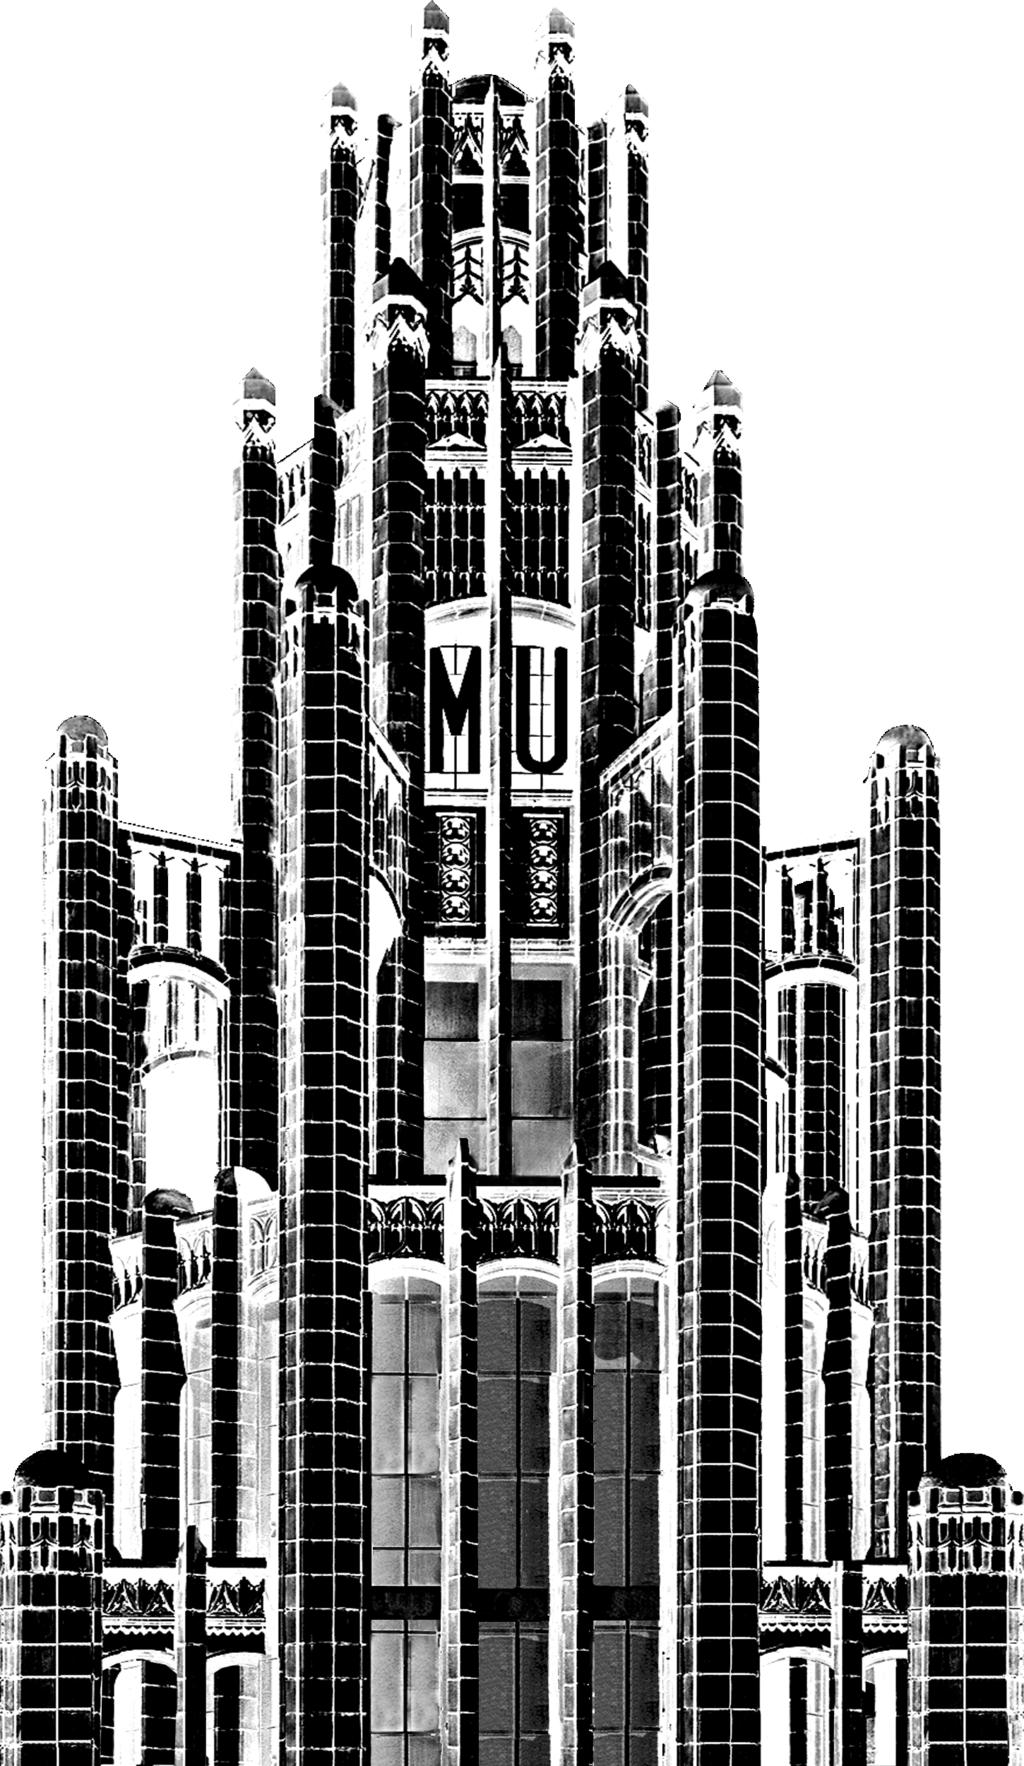 plus a formal guided tour of the Manchester Unity Building, including